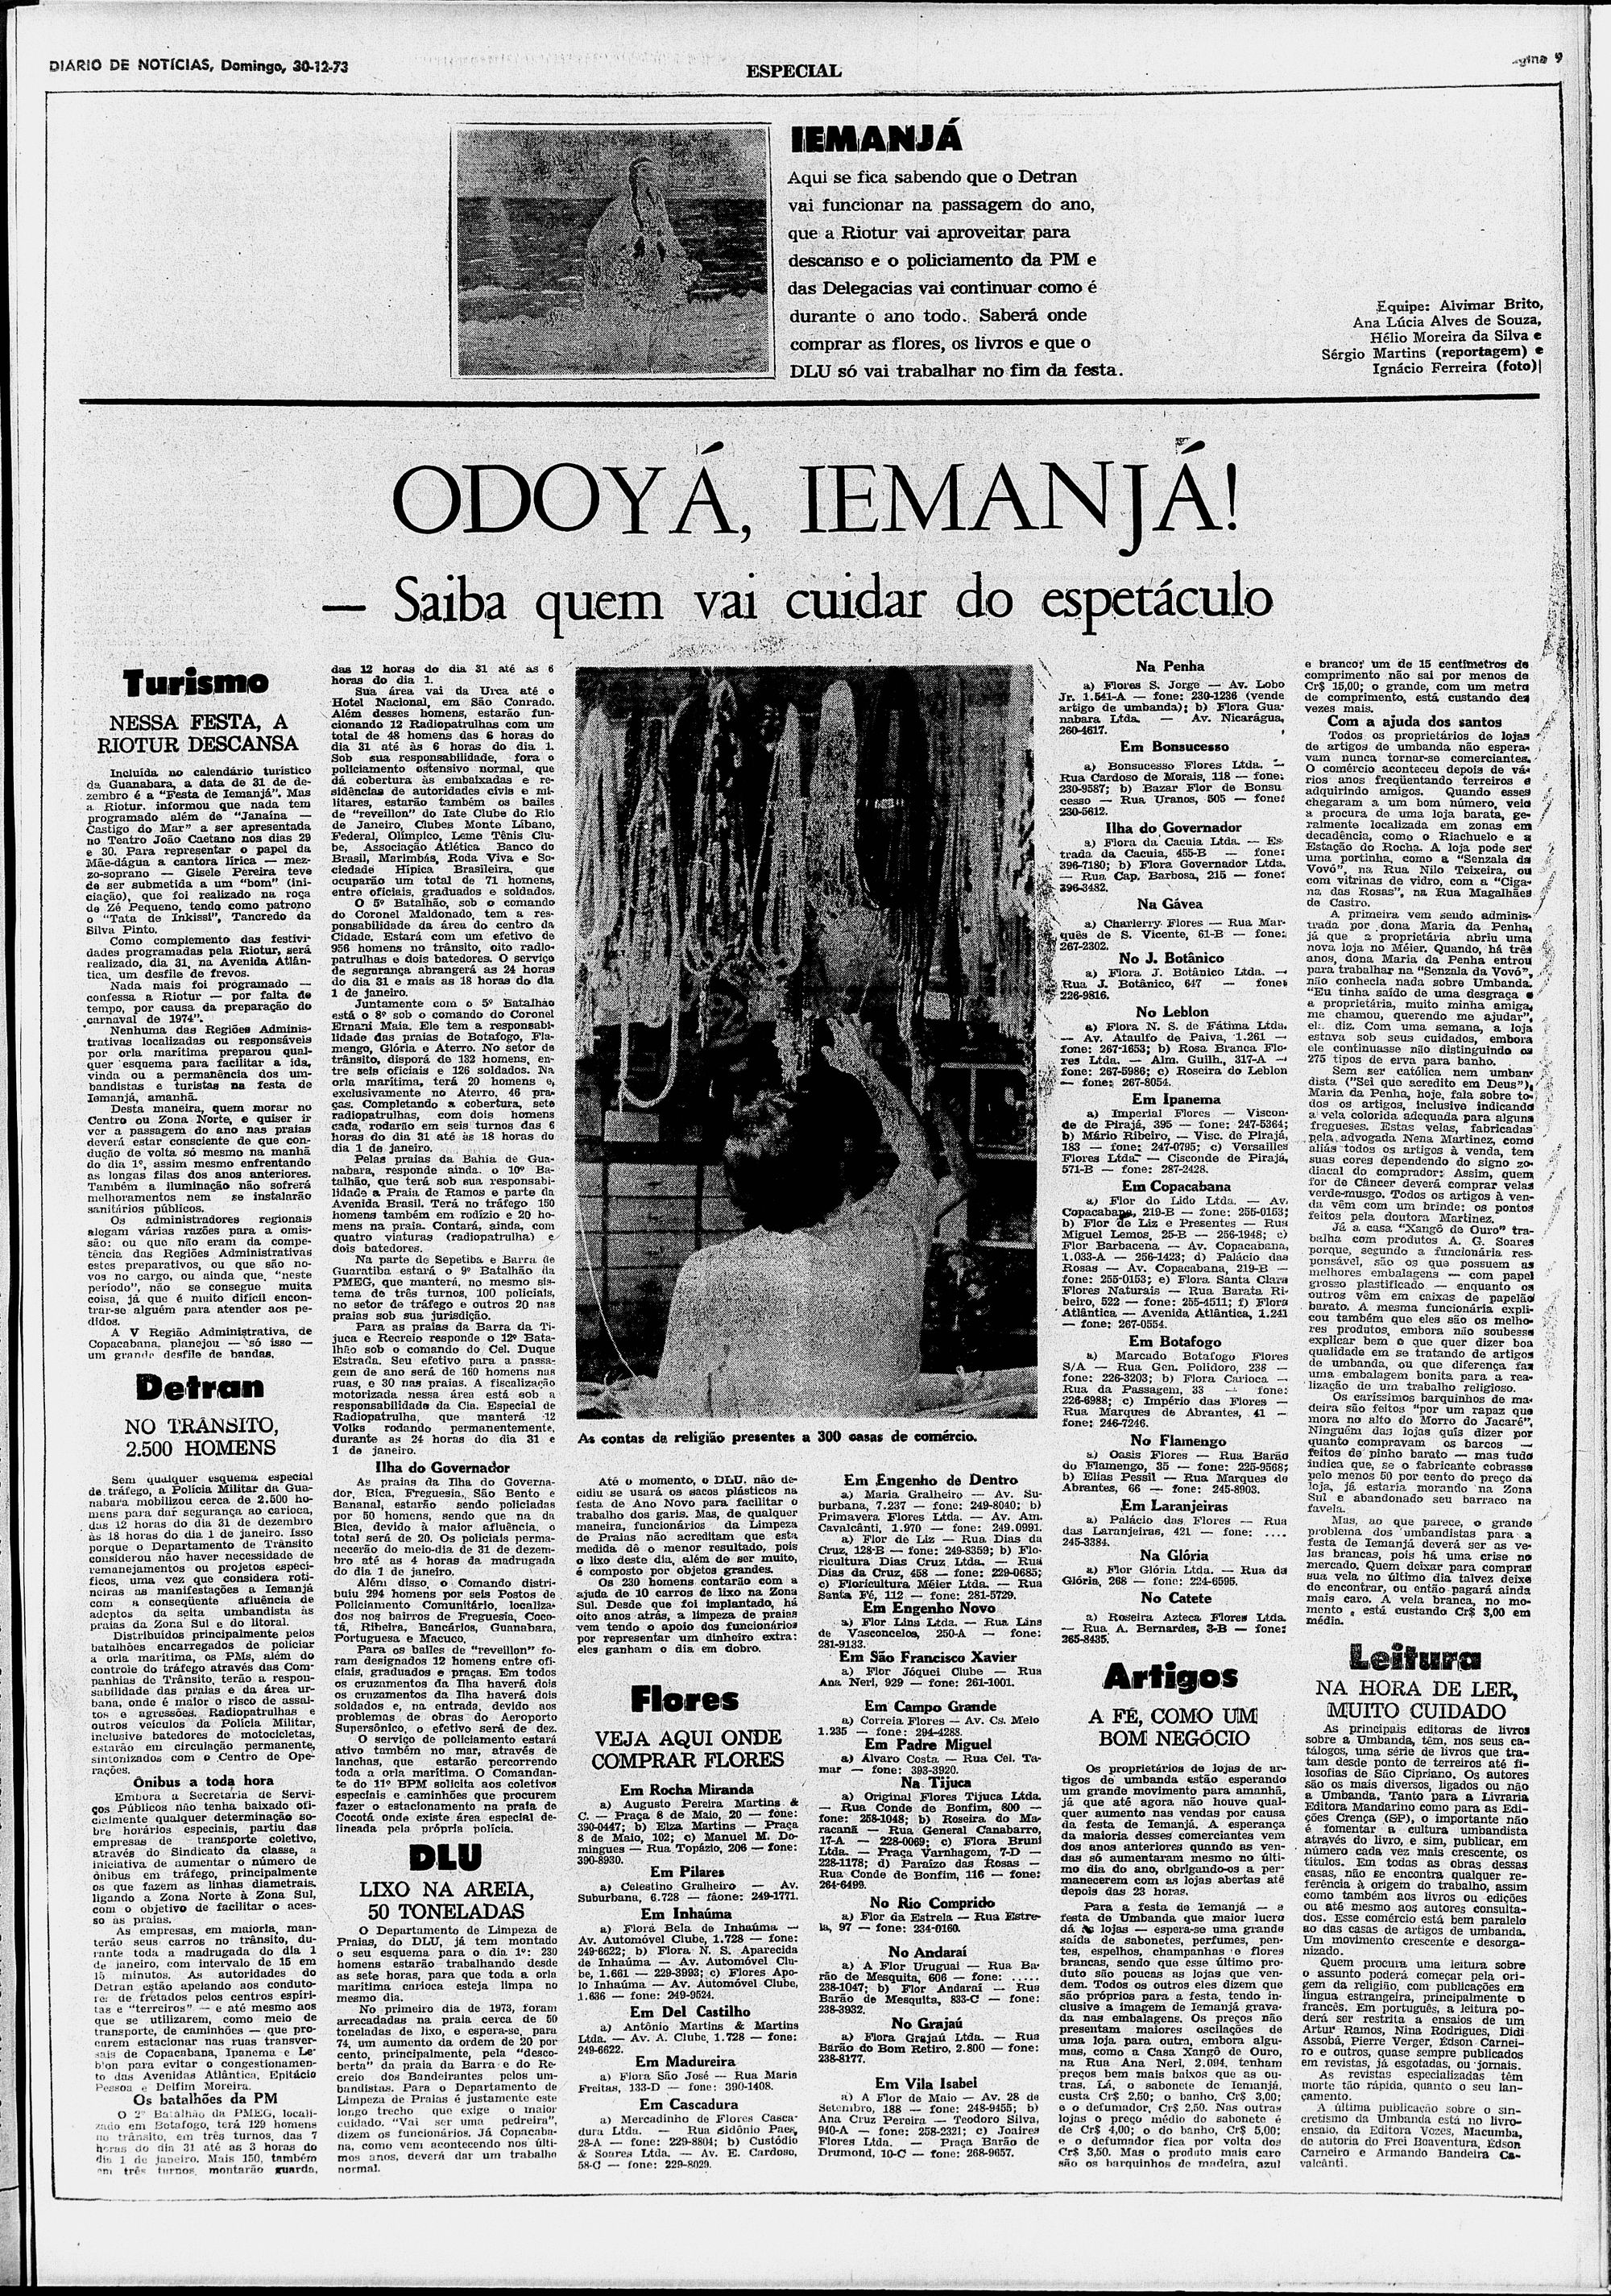 Diario de Noticias Newspaper, December 1973. The deadline in portuguese says "Odoyá Iemanjá!" ("Who will be responsible for the spectacle"). The article announces who will be responsible for the New Year’s Eve spectacle in honor of Yemanjá, and lists shops where ritualistic articles were available. Top image: a reproduction of Dalla Paes Leme’s Yemanjá representation. Central image: a picture of a salesman grabbing afro-religious collars.